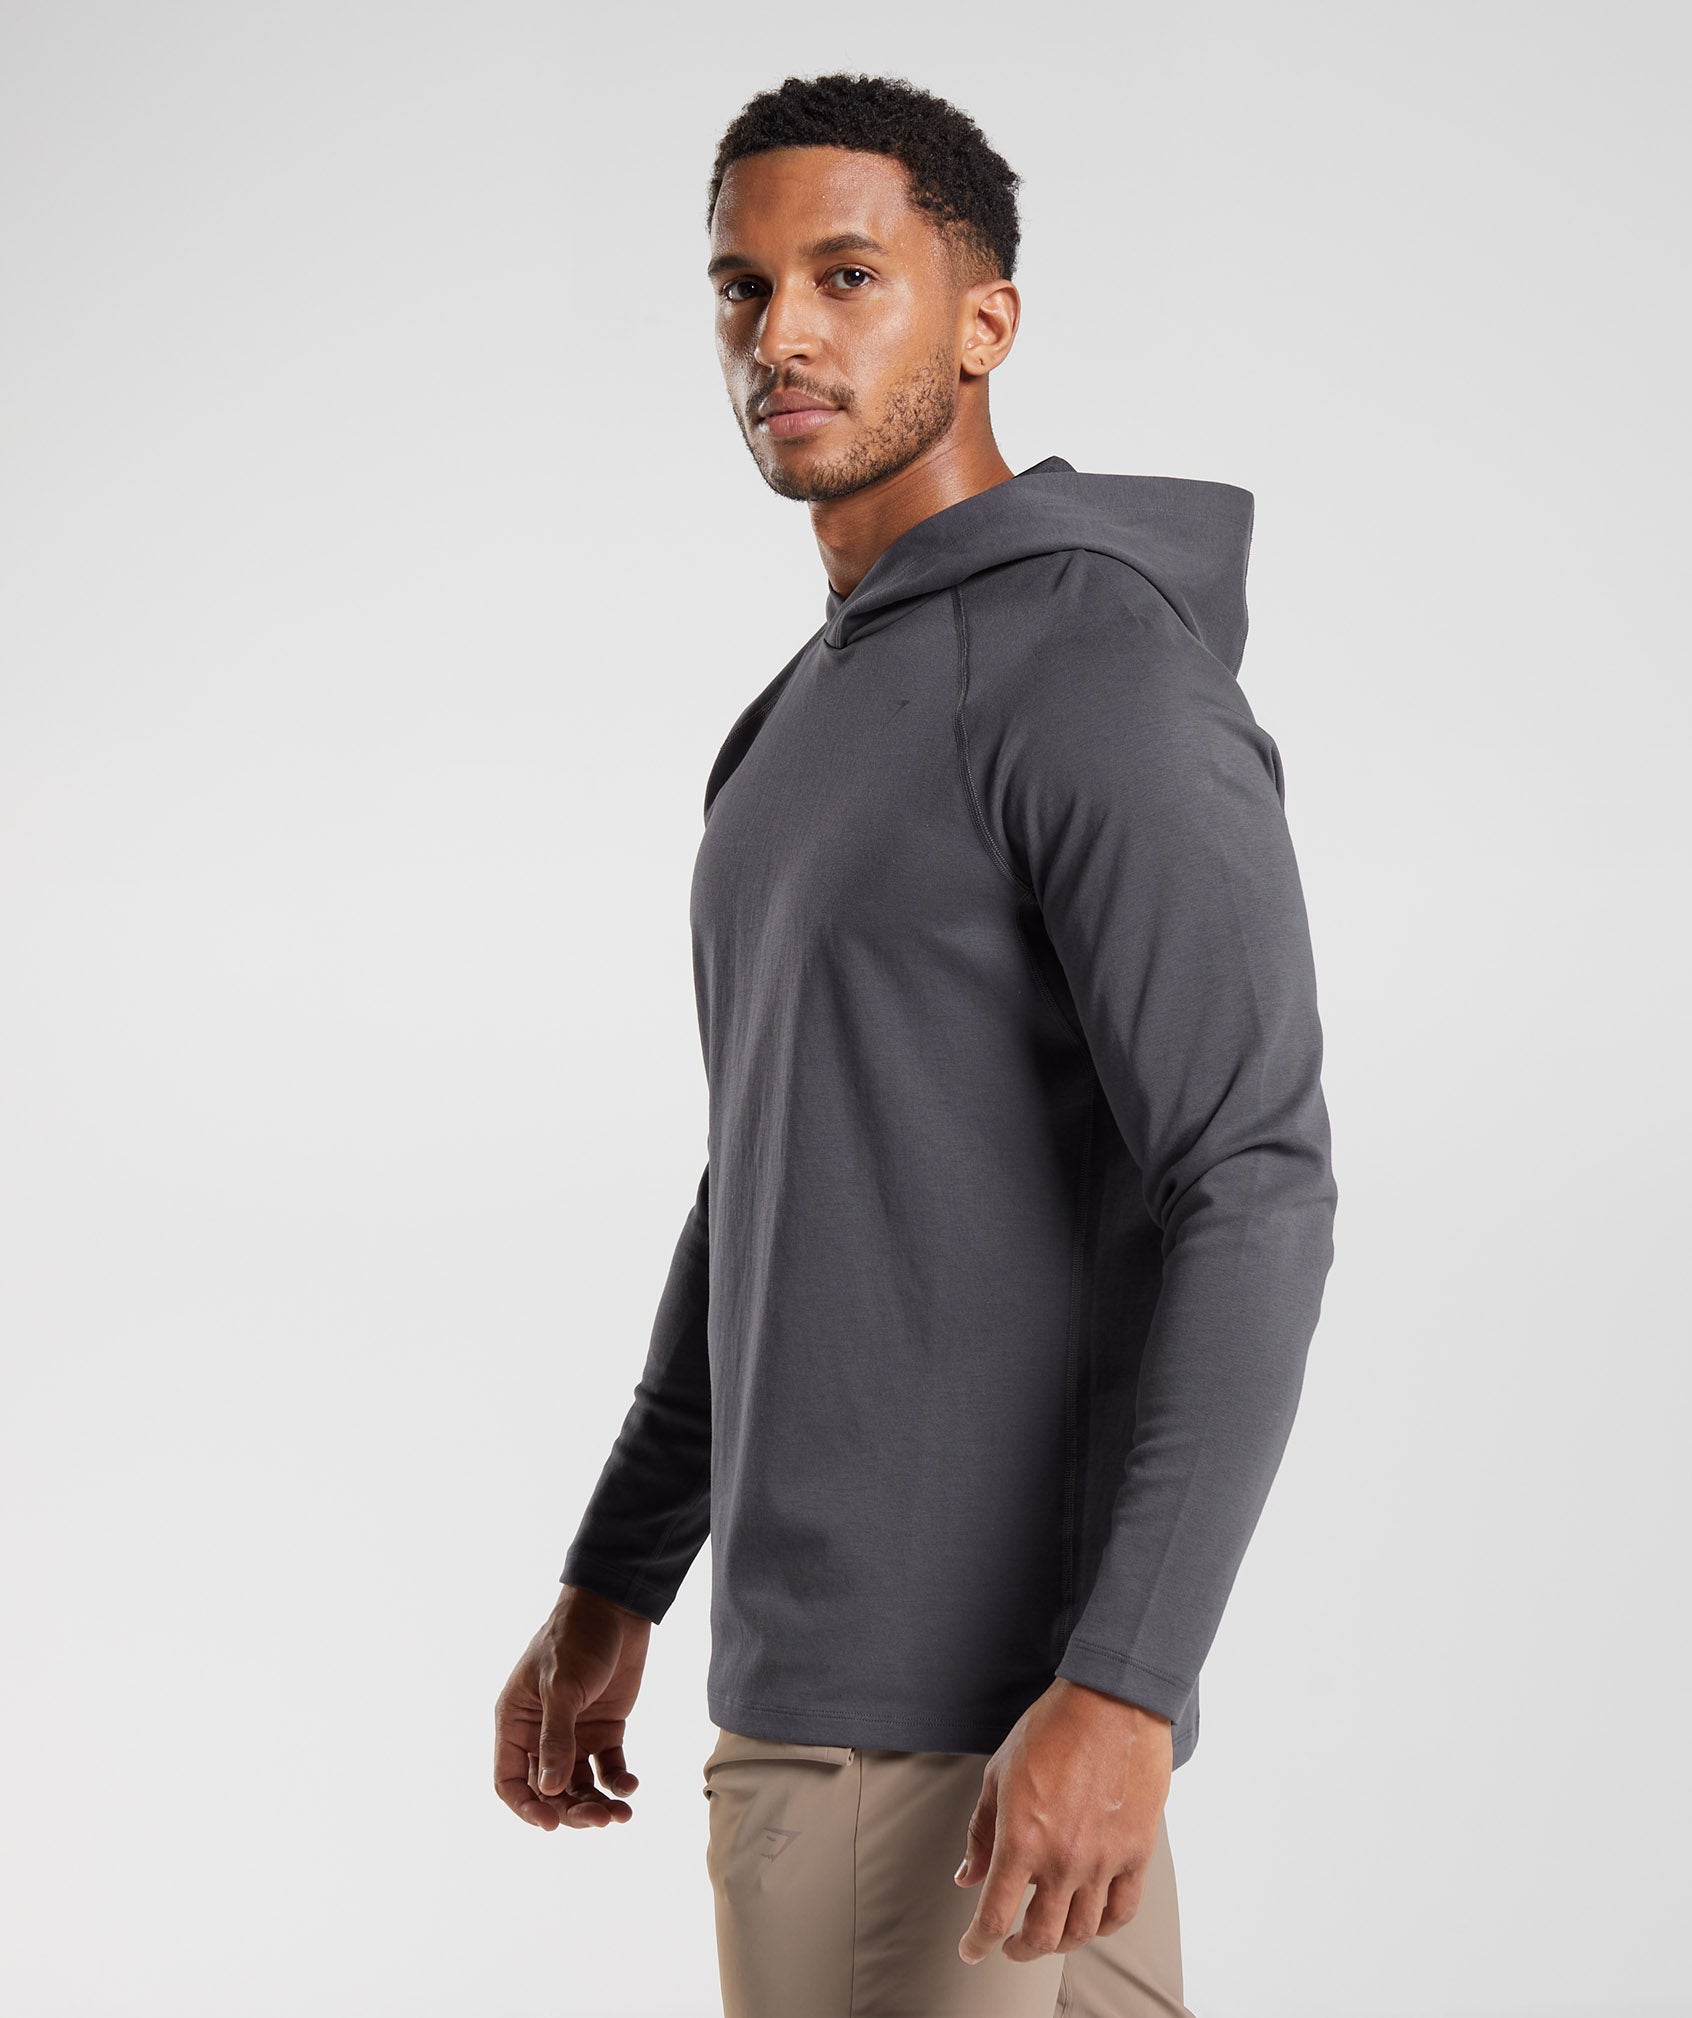 Gymshark - Out of this world. Order the impeccable Onyx Seamless Hooded top  in charcoal now. Only on www.gymshark.com